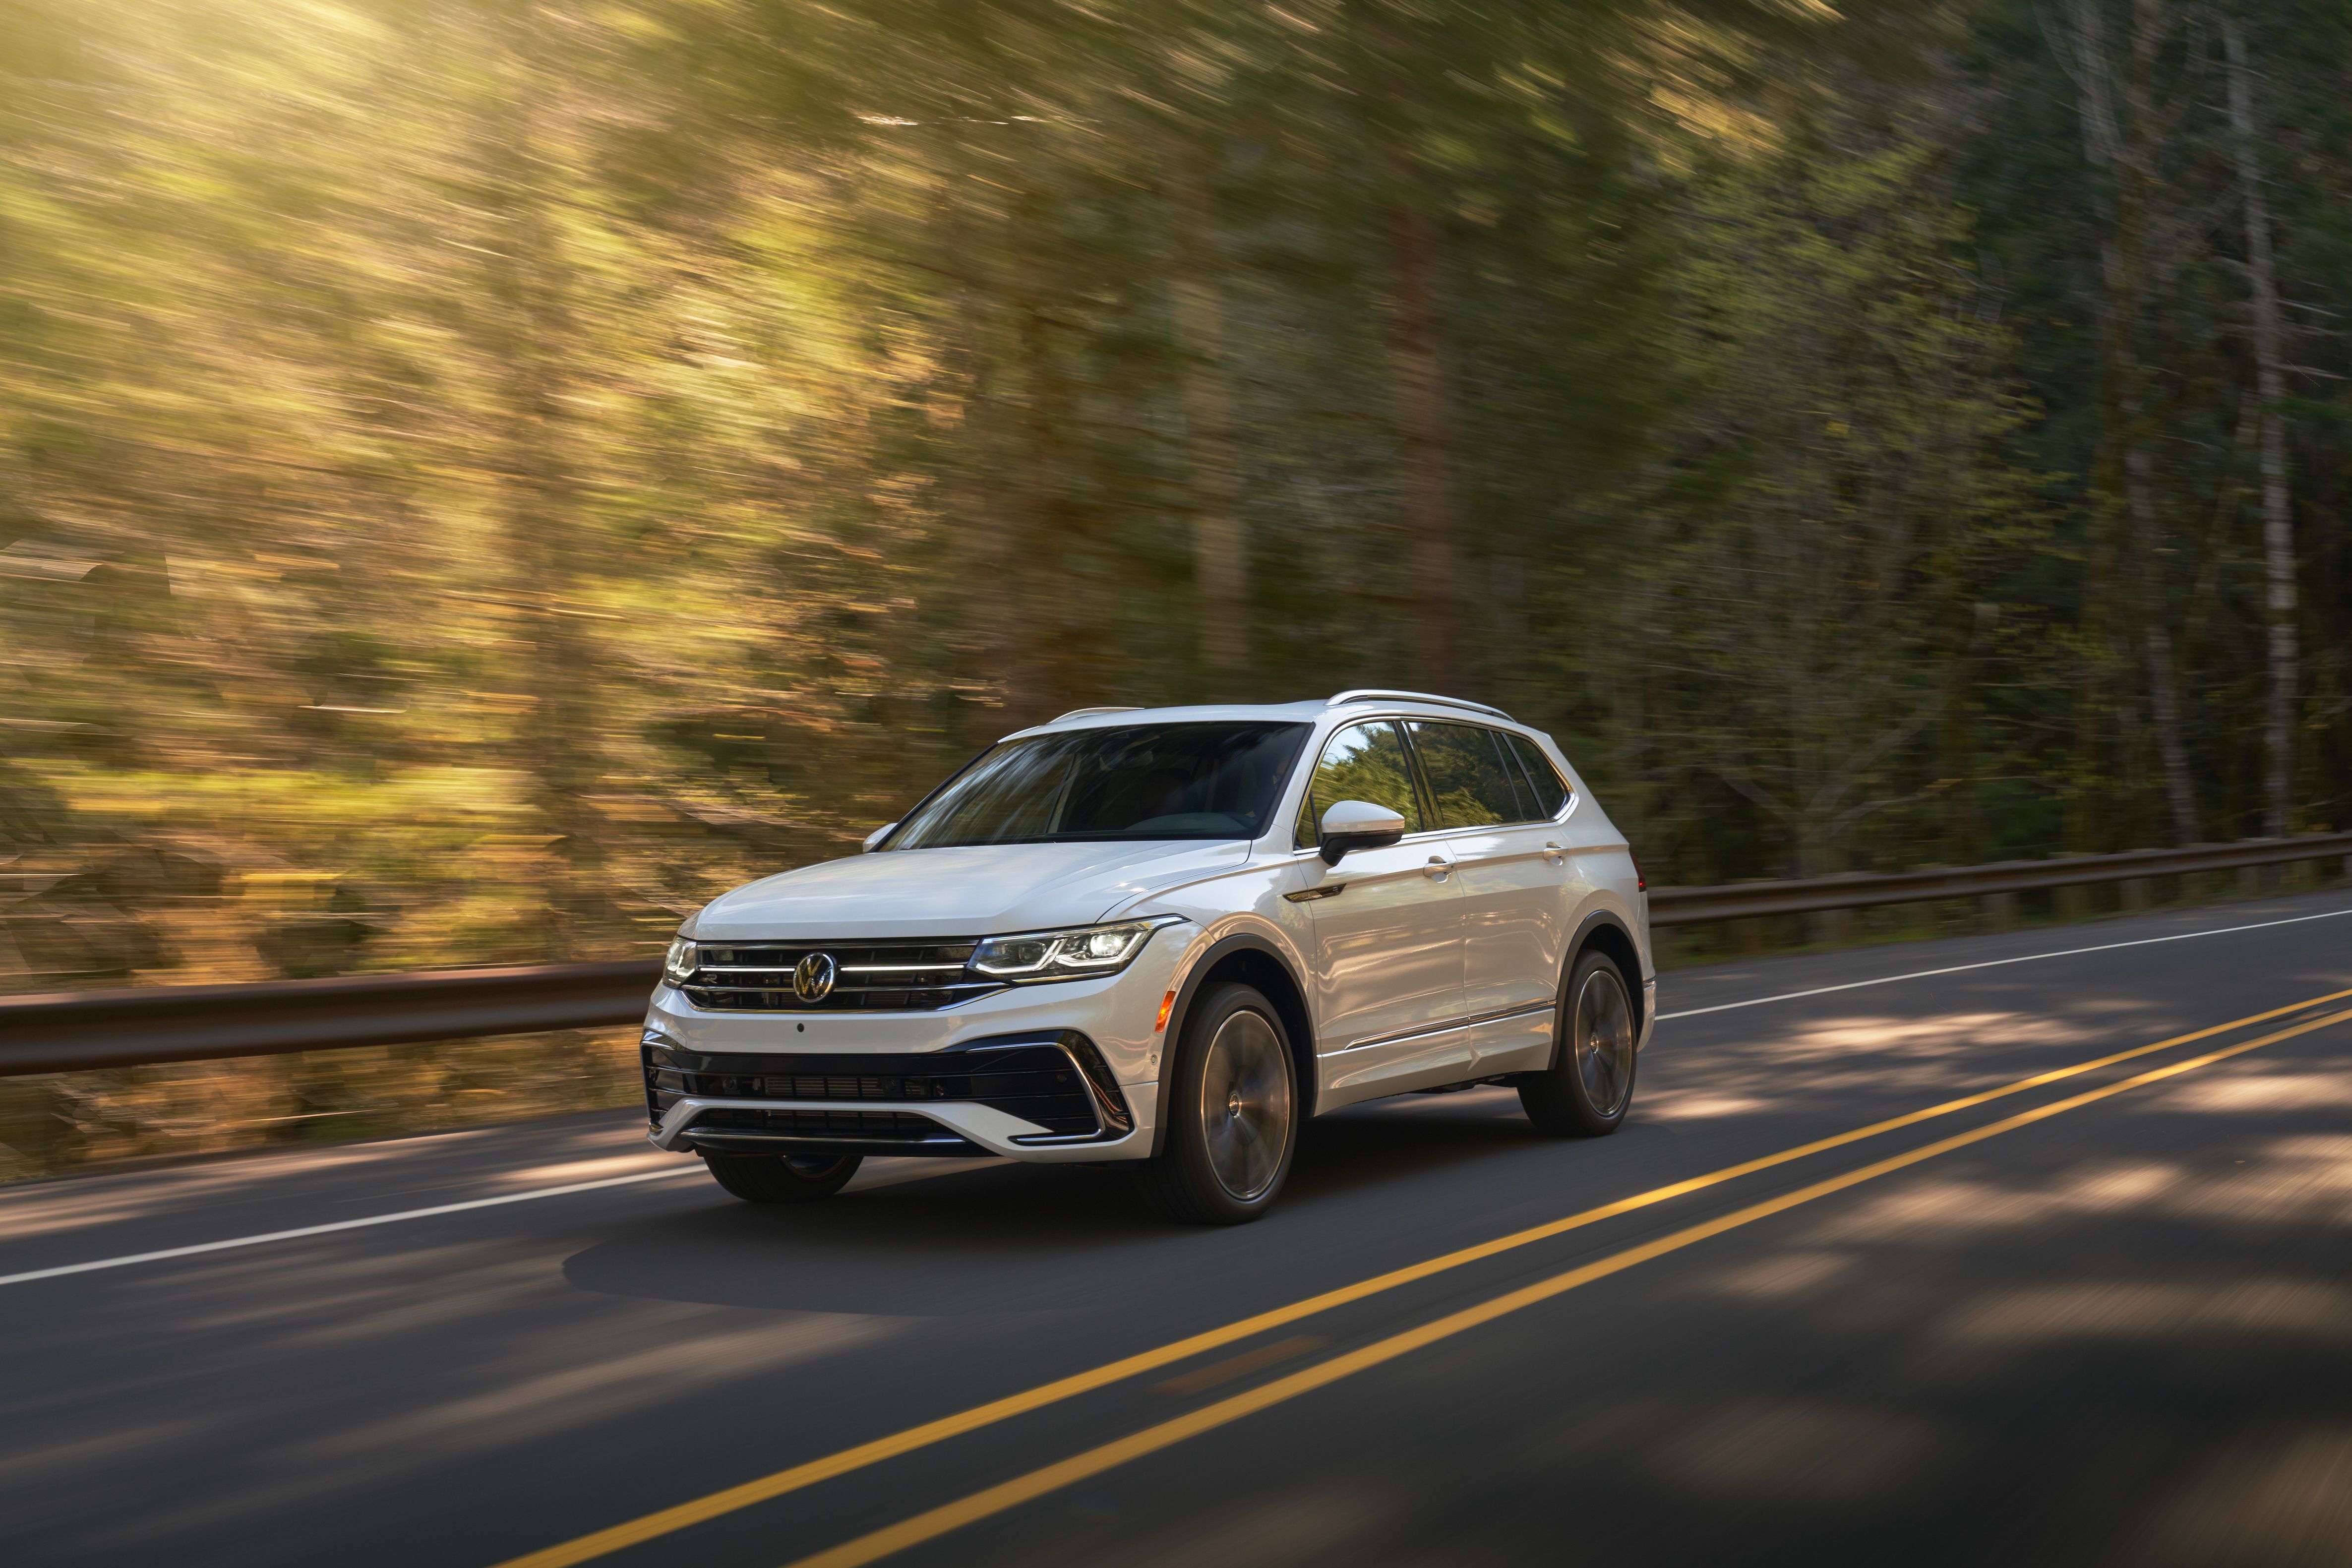 Refreshed '22 VW Tiguan Arrives This Fall